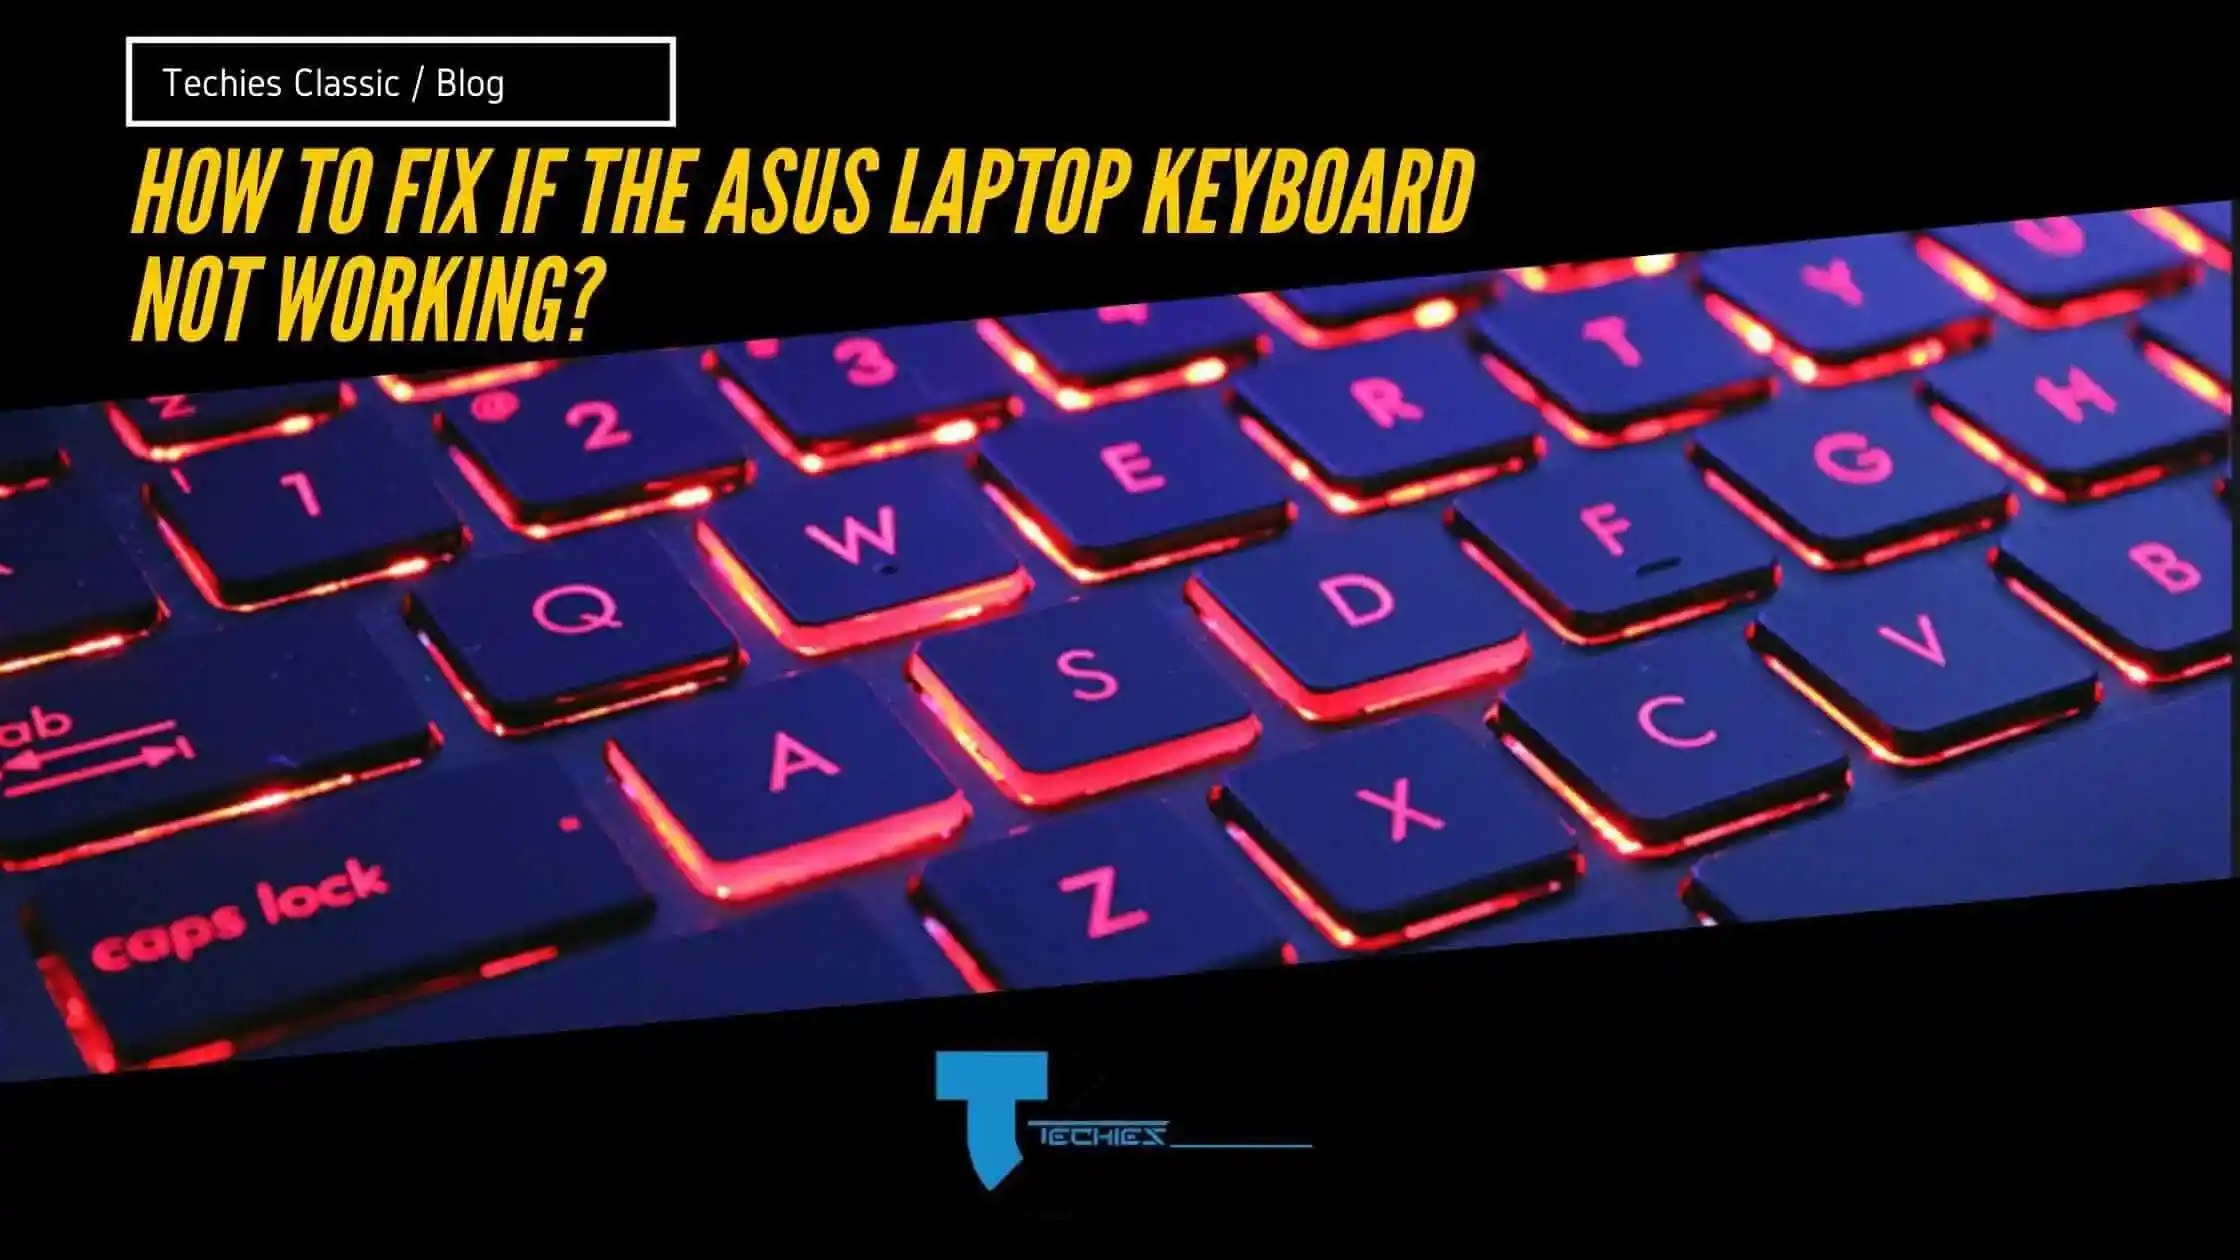 How to fix if the ASUS laptop keyboard not working?